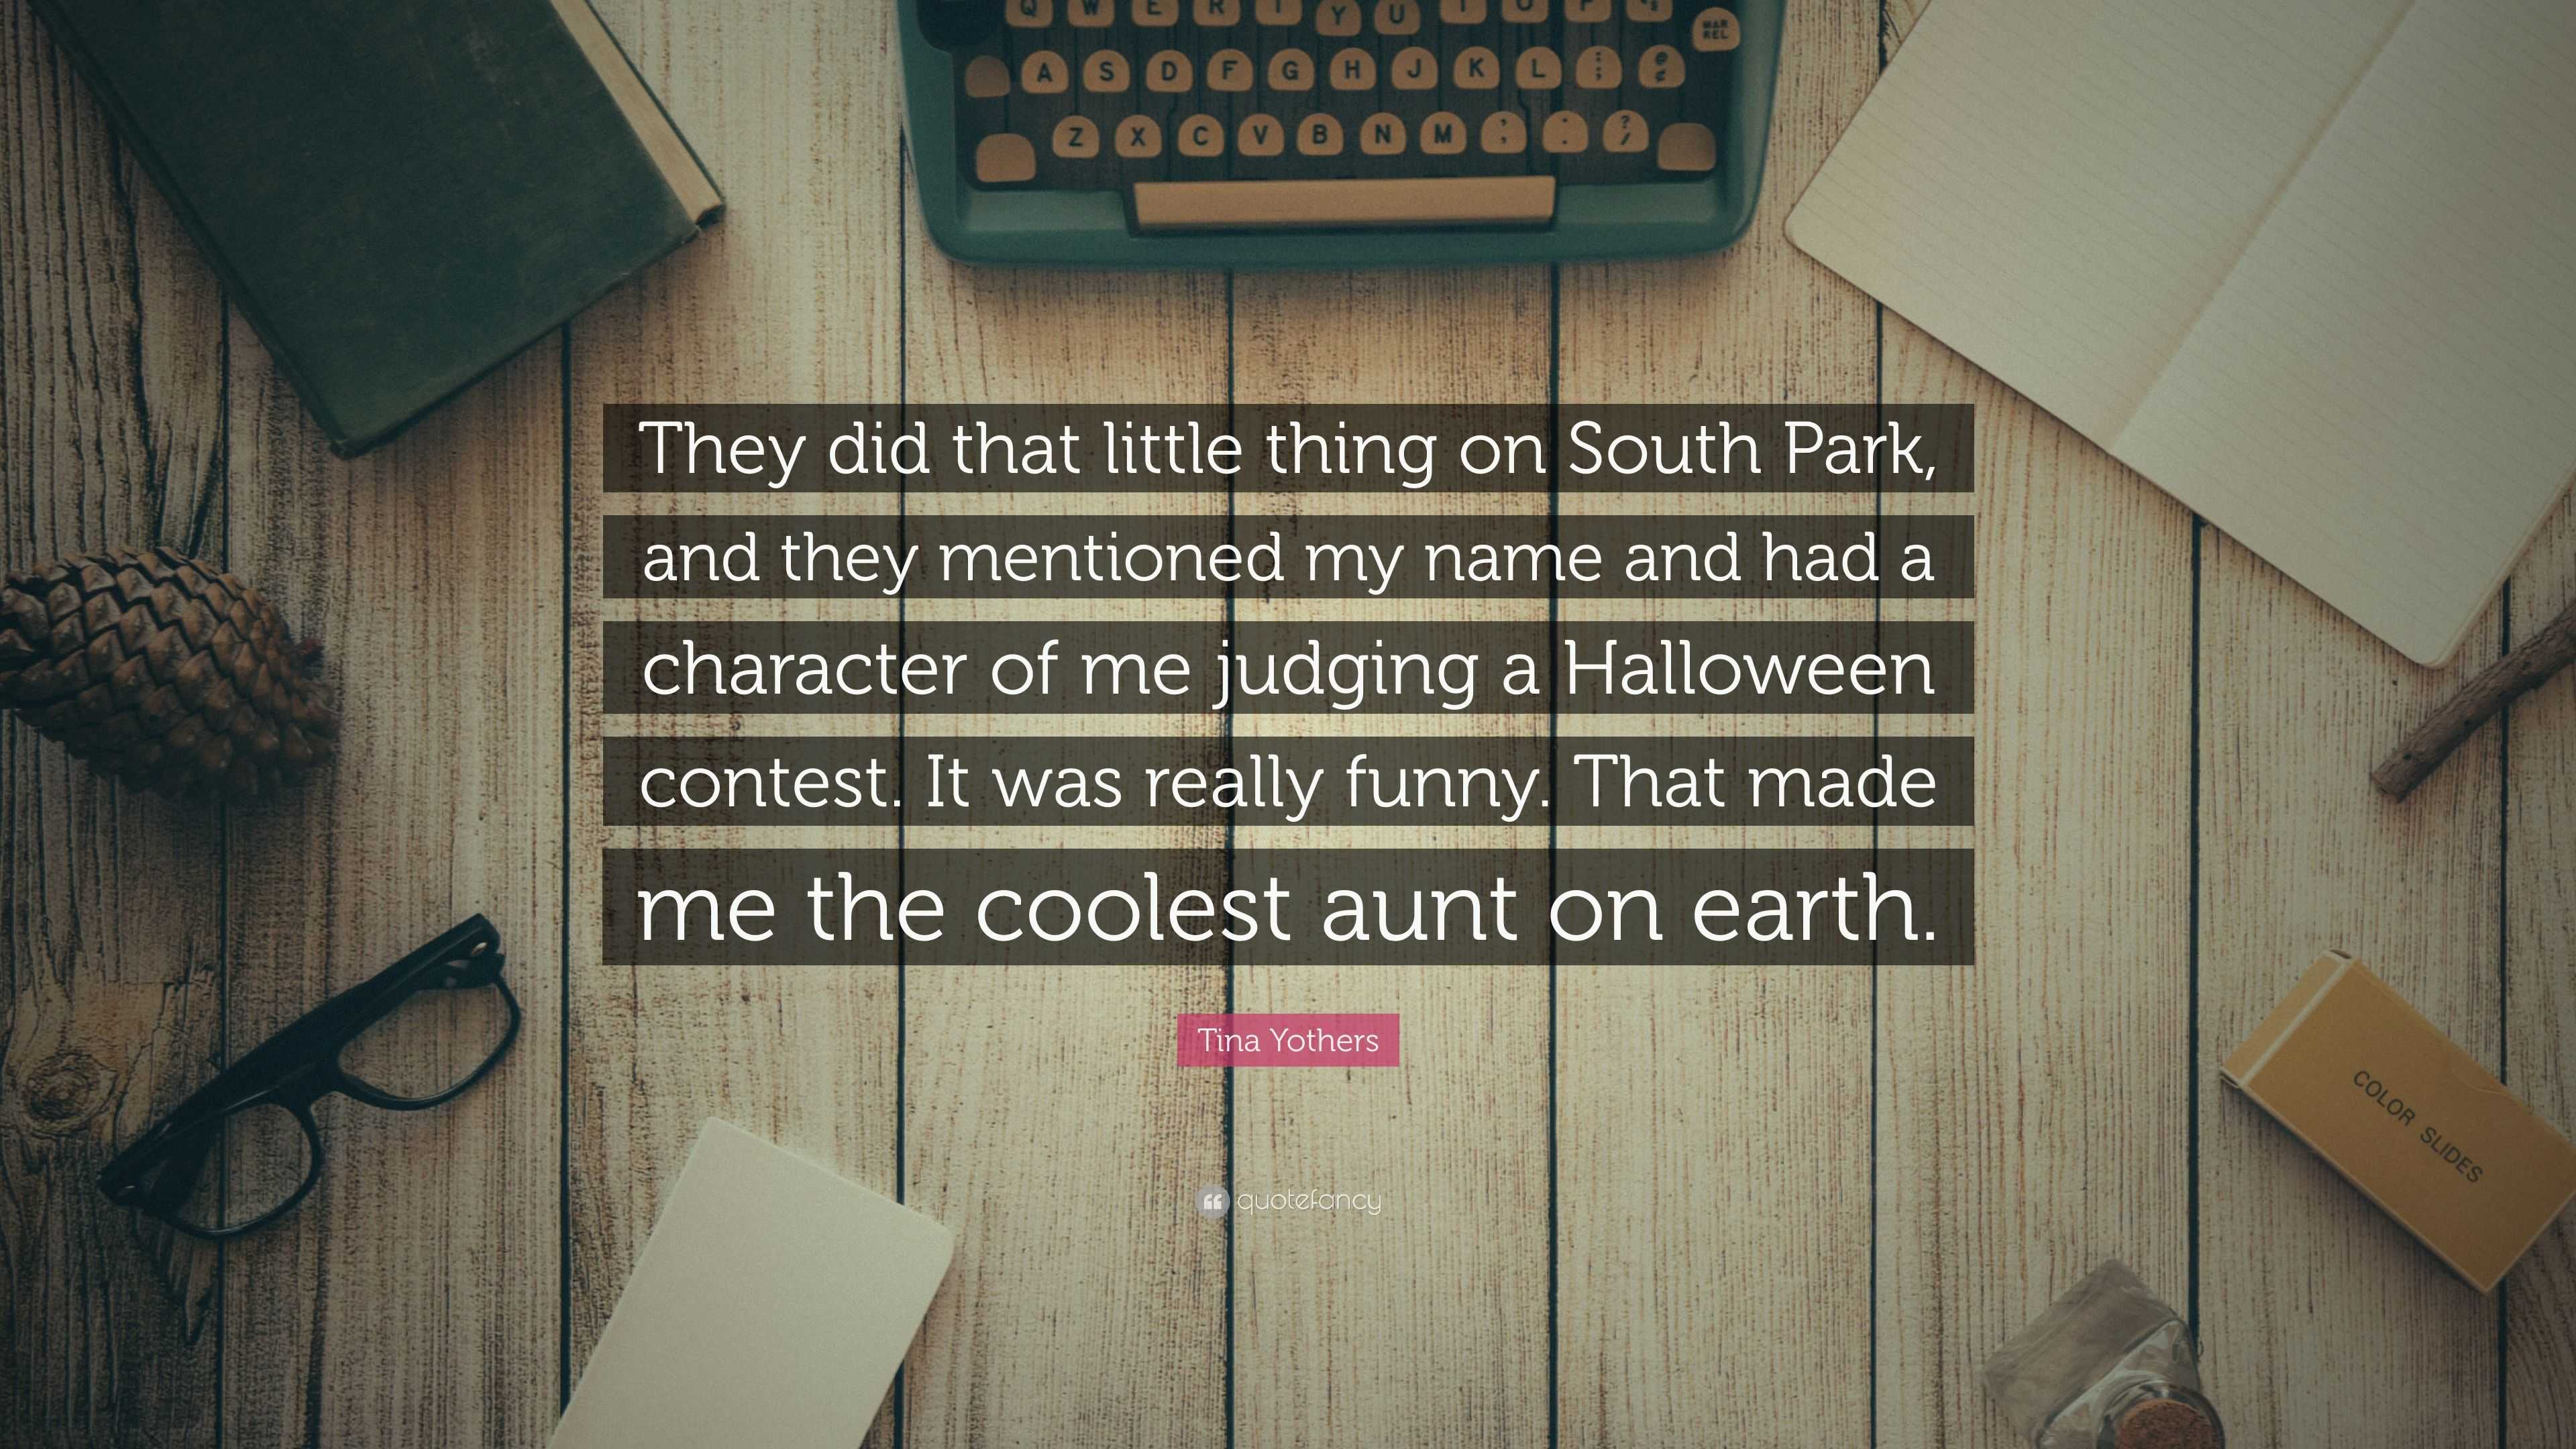 Tina Yothers Quote: “They did that little thing on South Park, and they  mentioned my name and had a character of me judging a Halloween conte...”